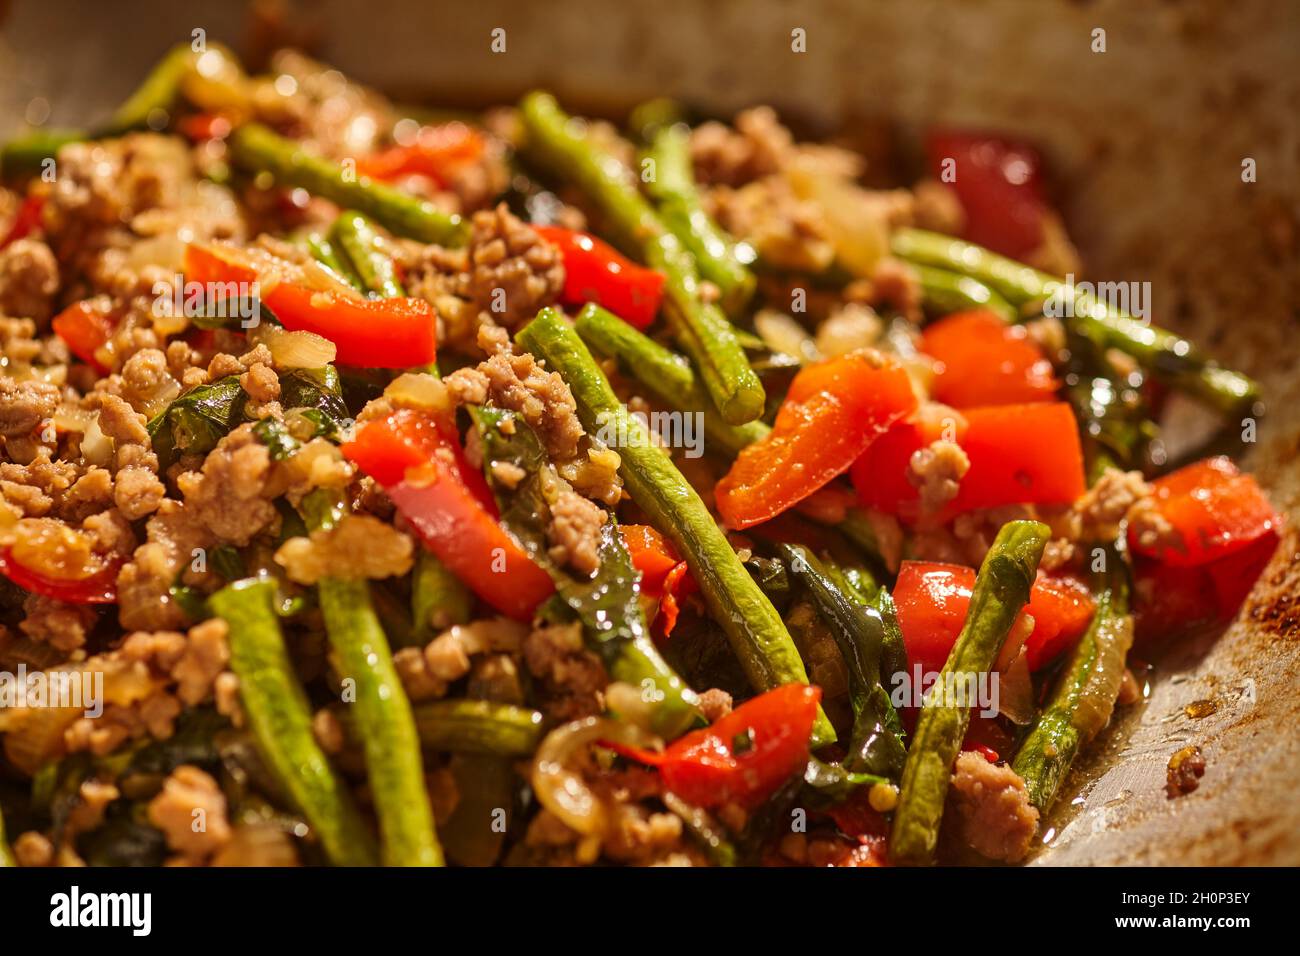 Pad Kra Pao, the Thai basil stir-fry made with pork in a stainless steel wok Stock Photo